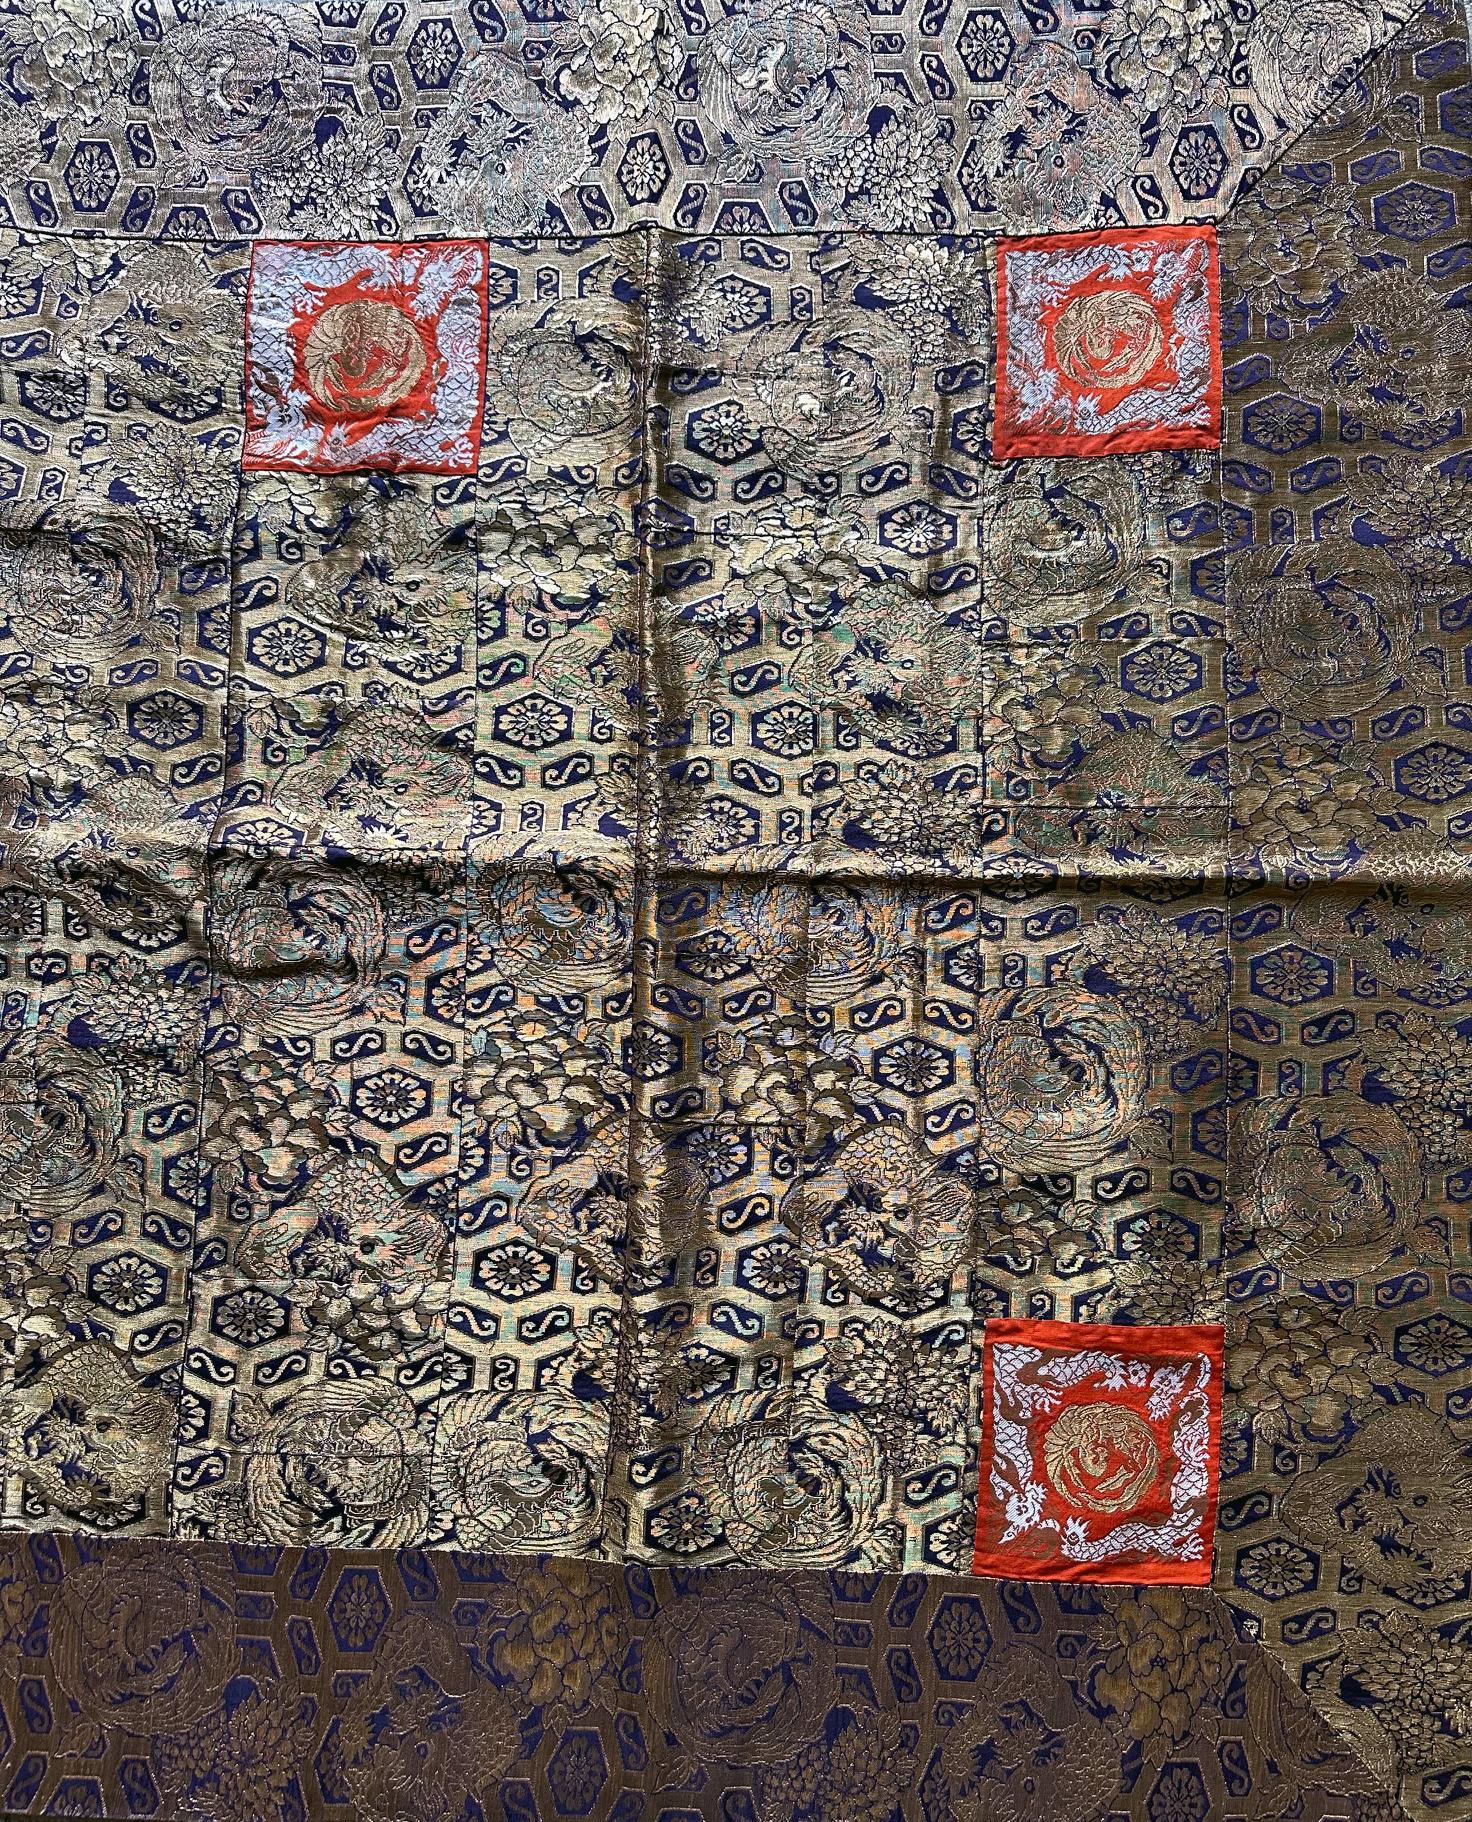 19th Century Magnificent Antique Japanese Woven Brocade Kesa Monk's Robe Meiji Period For Sale